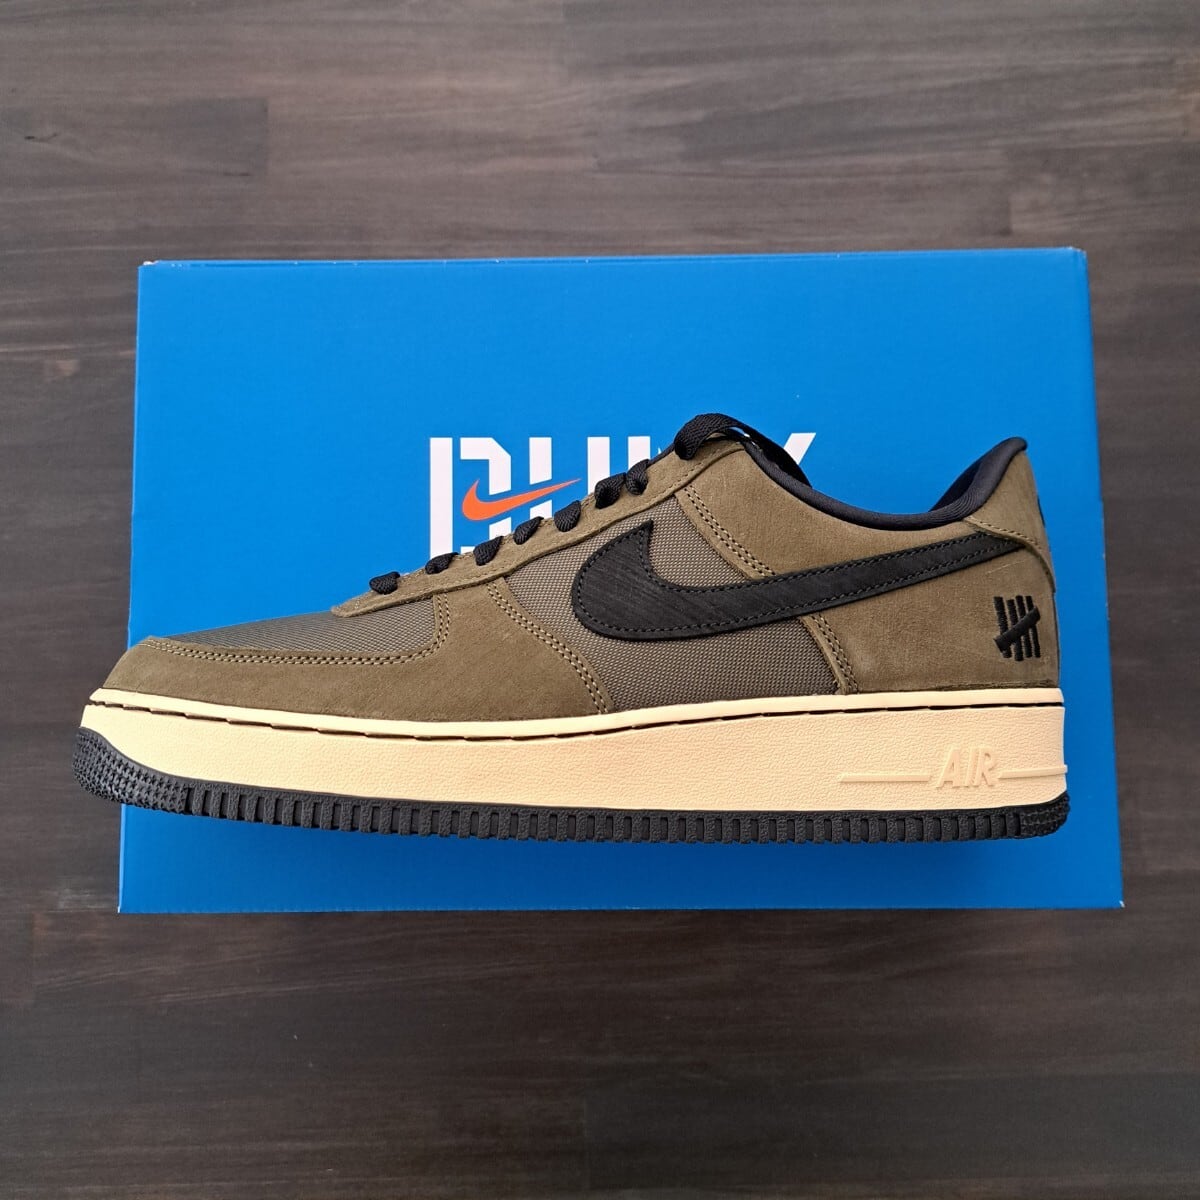 NIKE×UNDEFEATED AIR FORCE1 LOW SP "OLIVE" 28cm | re.stoc